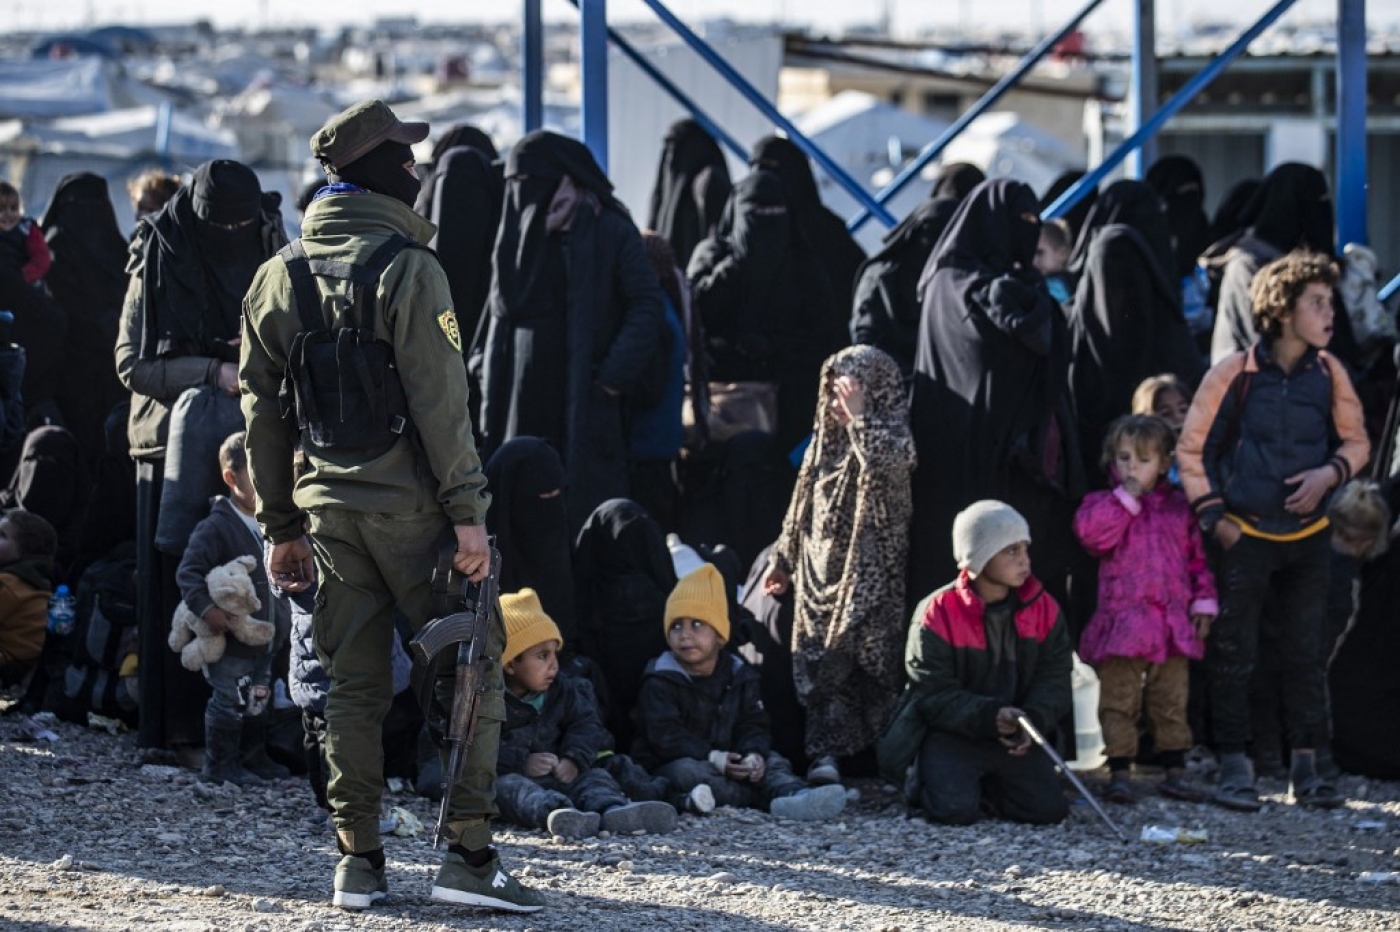 Tens of thousands of women and children have been detained in camps run by the Kurdish-led Syrian Democratic Forces militia in northeast Syria.